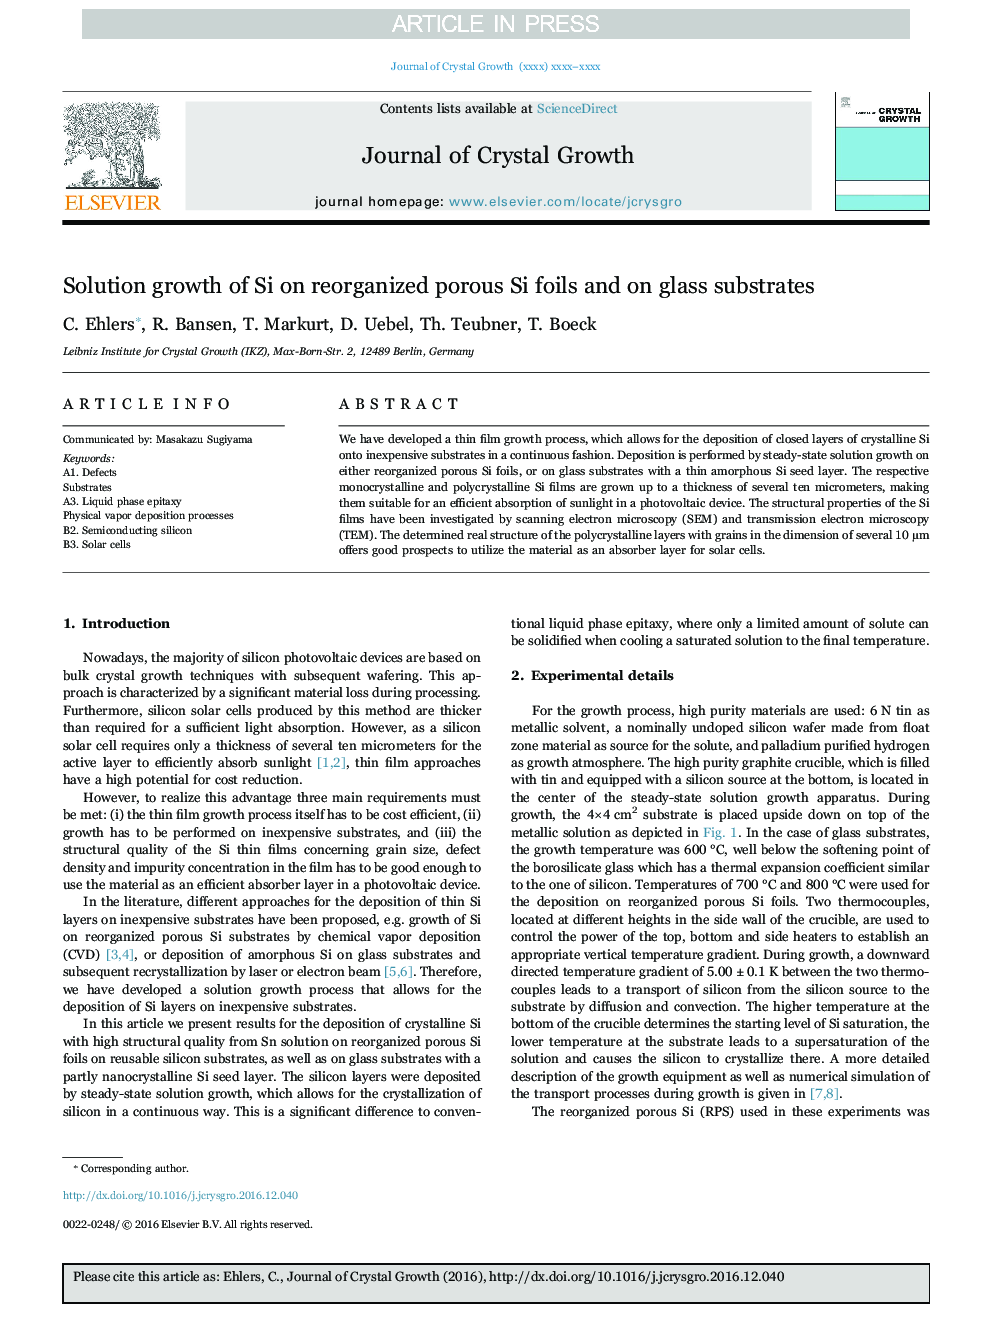 Solution growth of Si on reorganized porous Si foils and on glass substrates